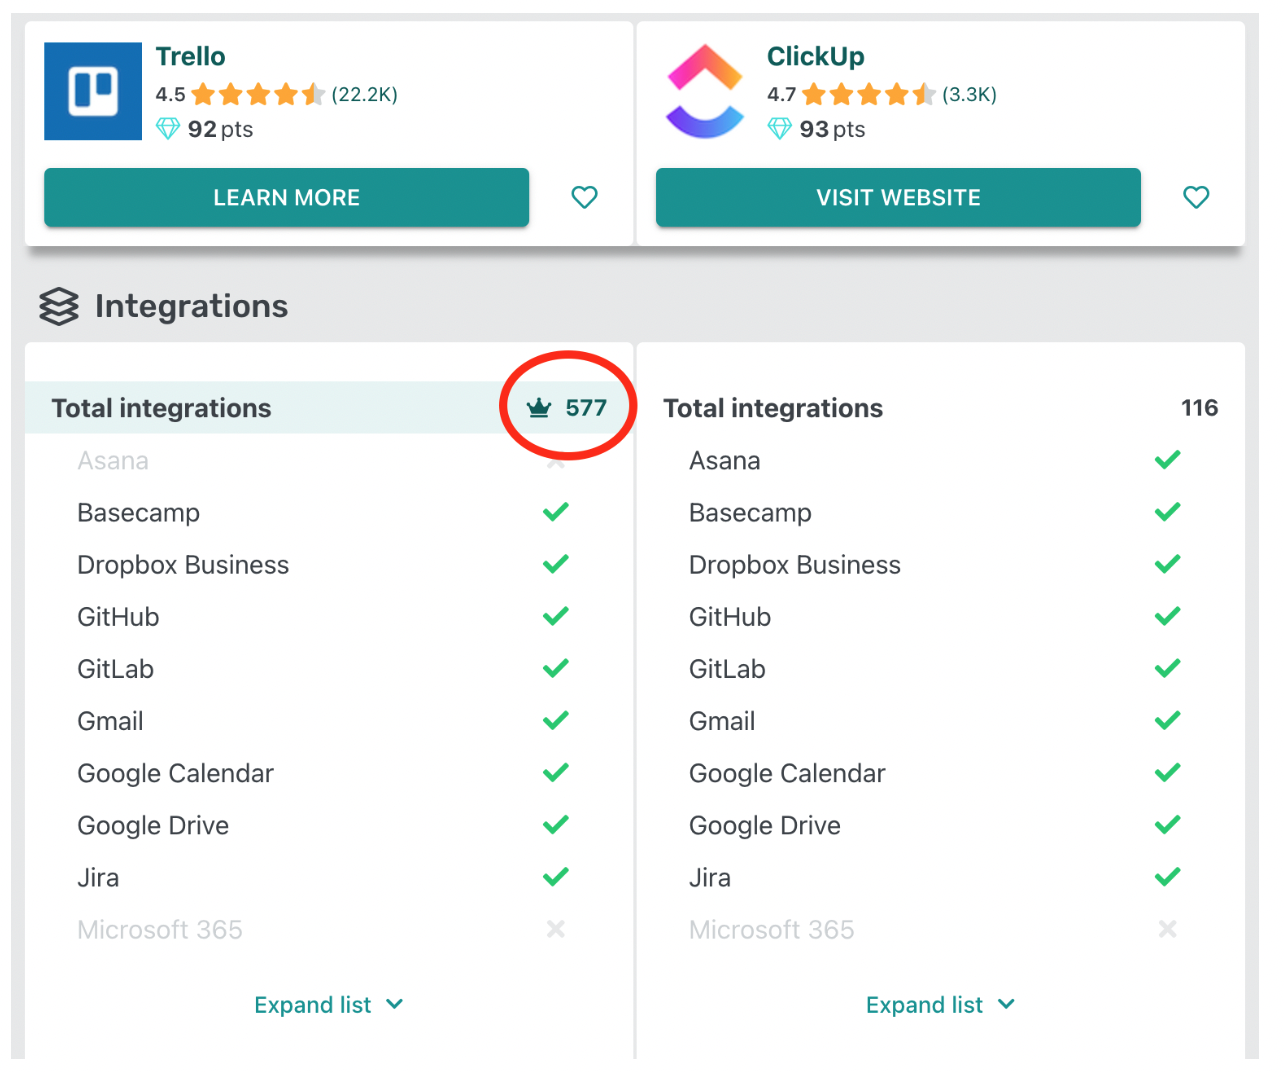 Screenshot of several integrations that both Trello and ClickUp are compatible with